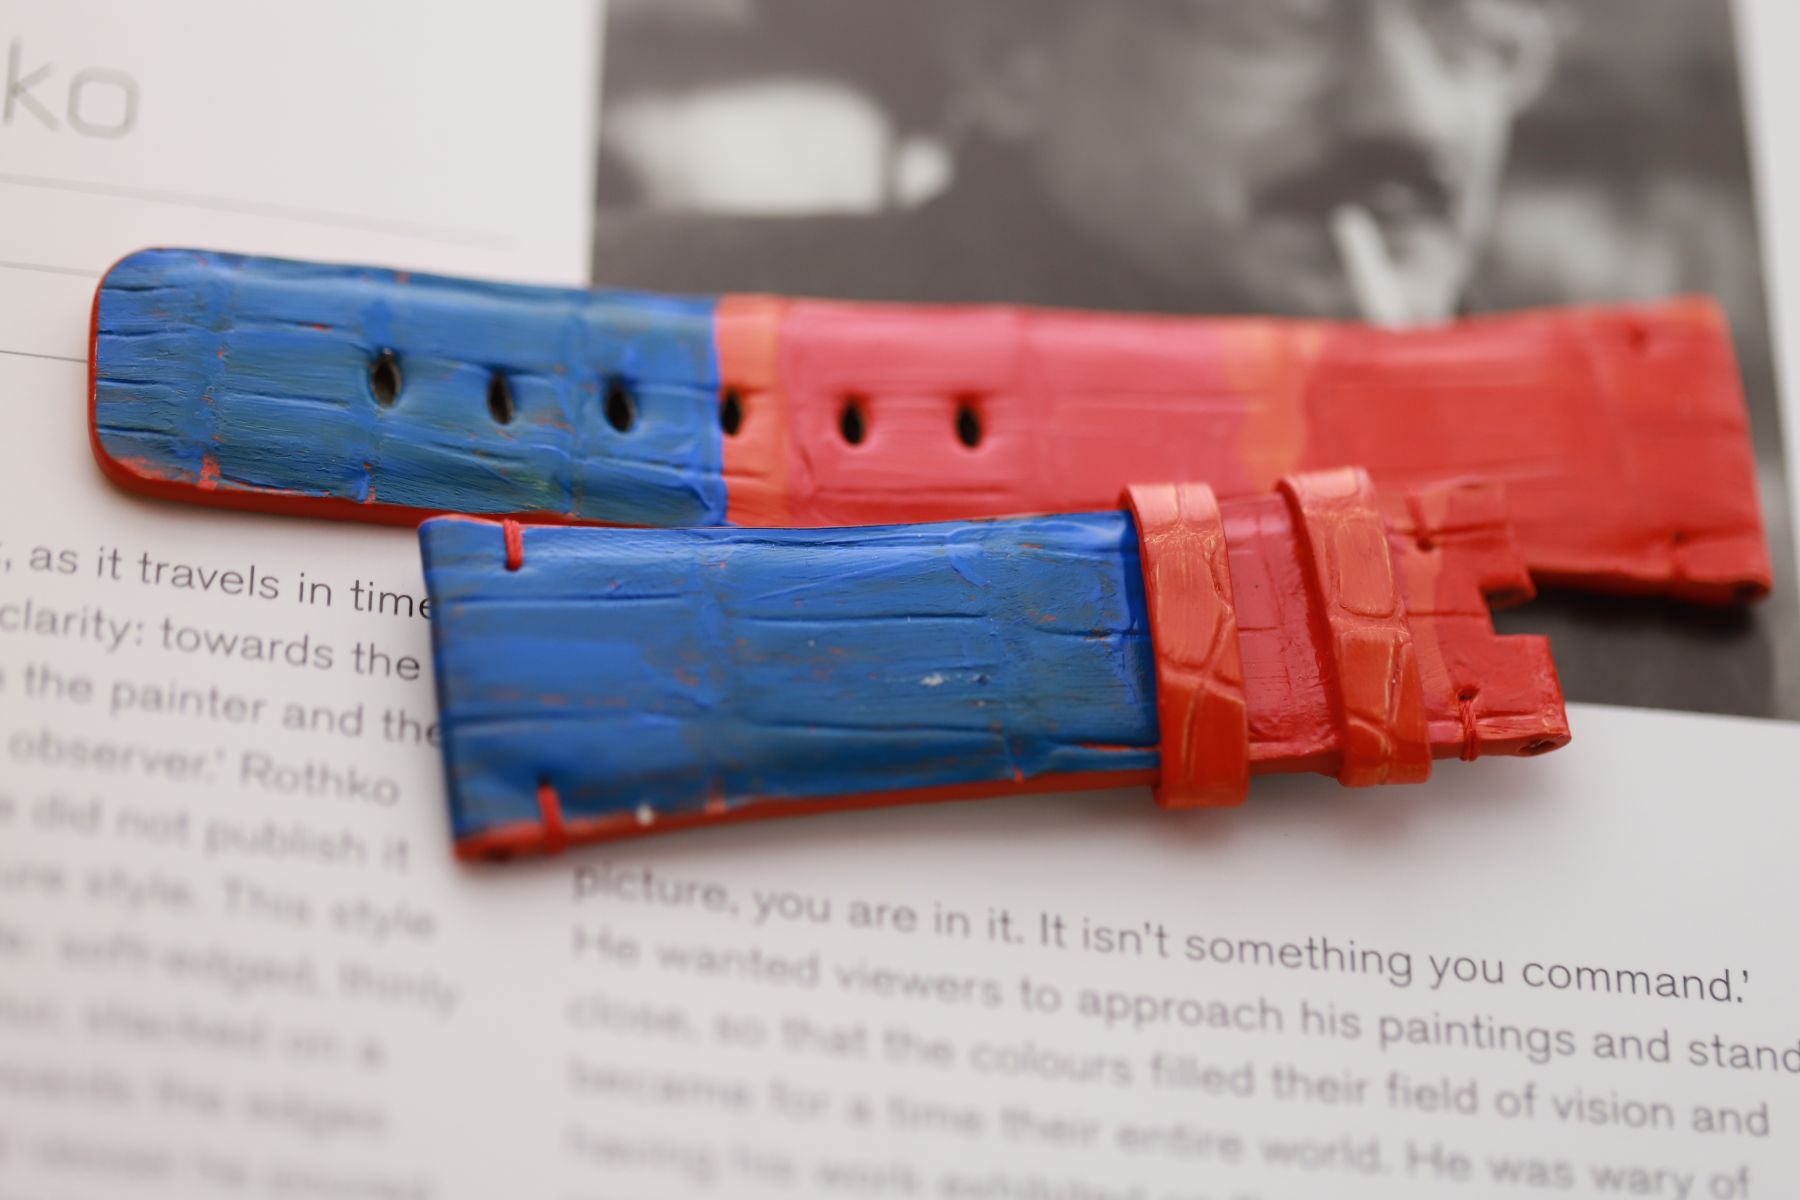 ART Affection: Hand-Painted Band for Apple Watch Inspired by Rothko's Royal Red and Blue